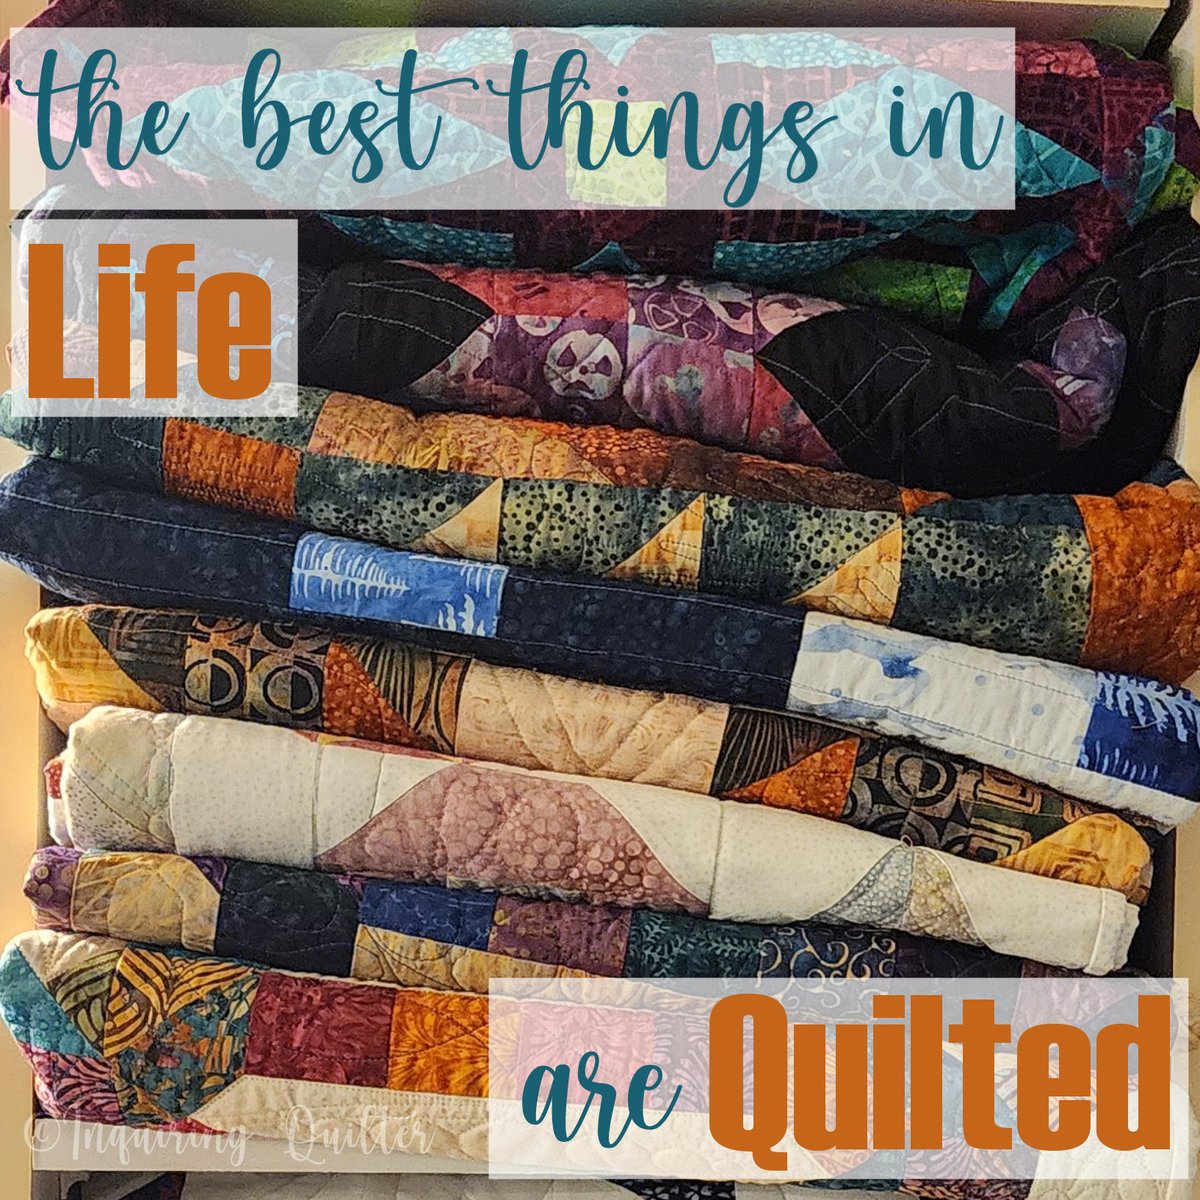 Ain't it the truth? #inquiringquilter #quiltingismytherapy #quiltingismybliss #quotestoliveby #quoteoftheday #quotes #quotesaboutlife #behappyandsmile #findyourjoy #quiltquotes